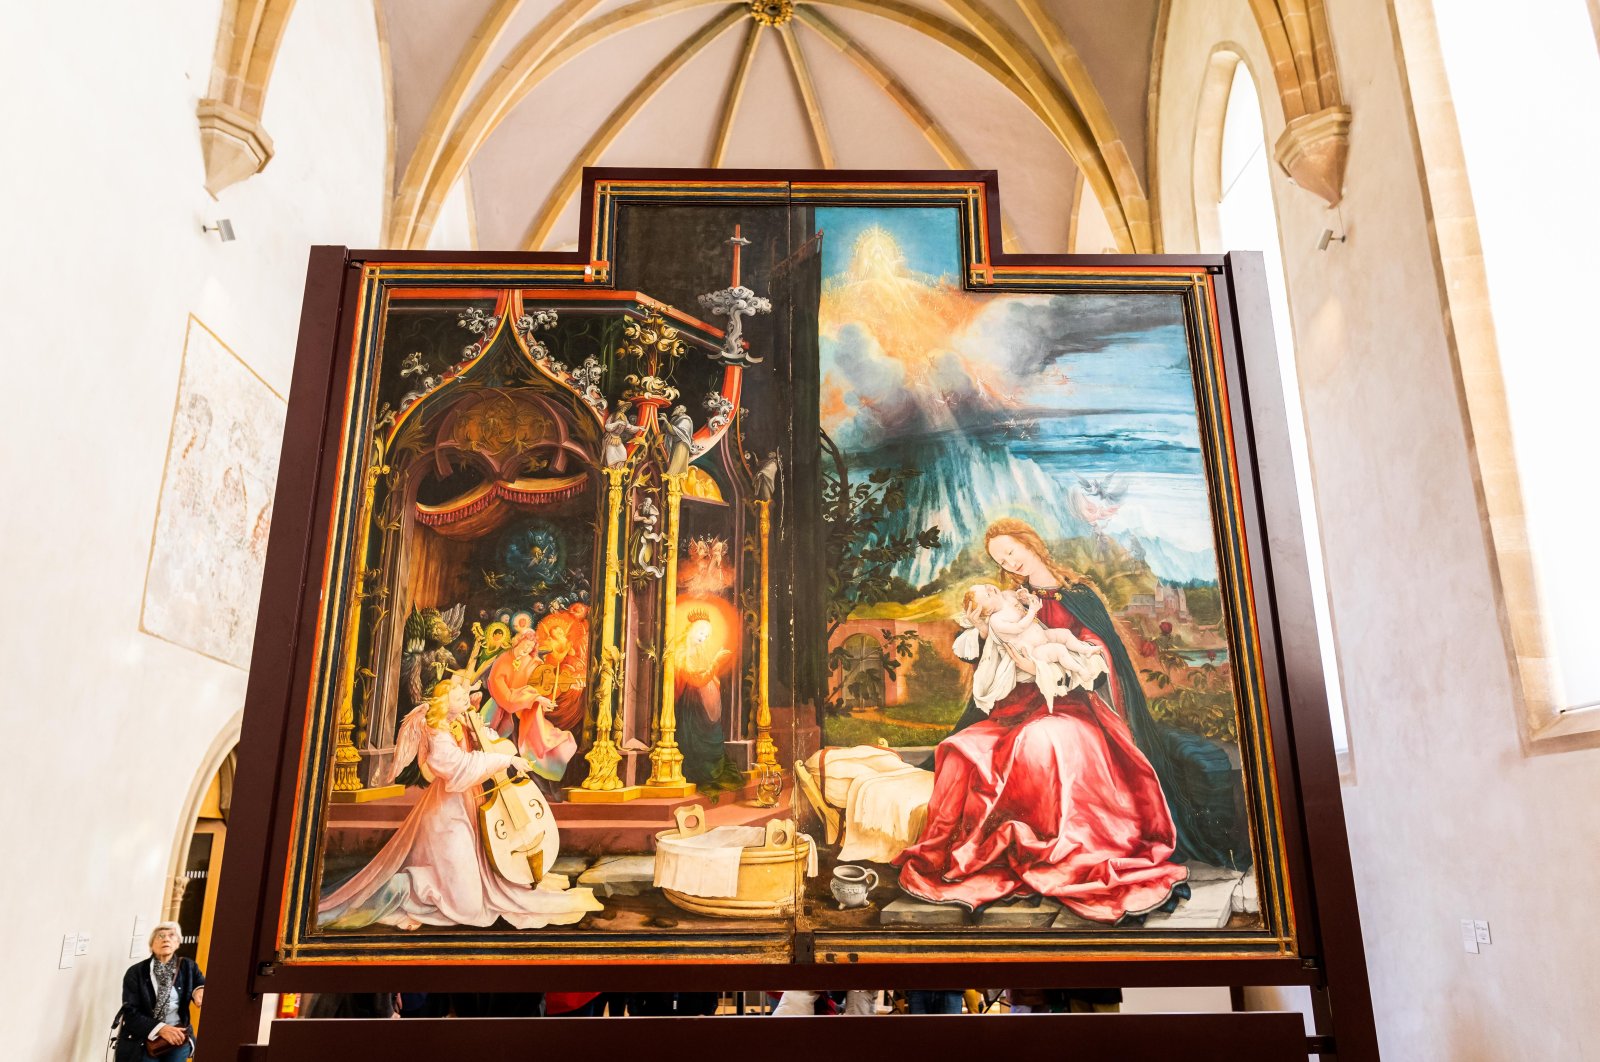 The Isenheim Altar in Colmar, one of the most important works in the history of sacred art, has been undergoing unusually extensive restoration work for several years, Colmar, France, Oct. 25, 2019. (dpa Photo)